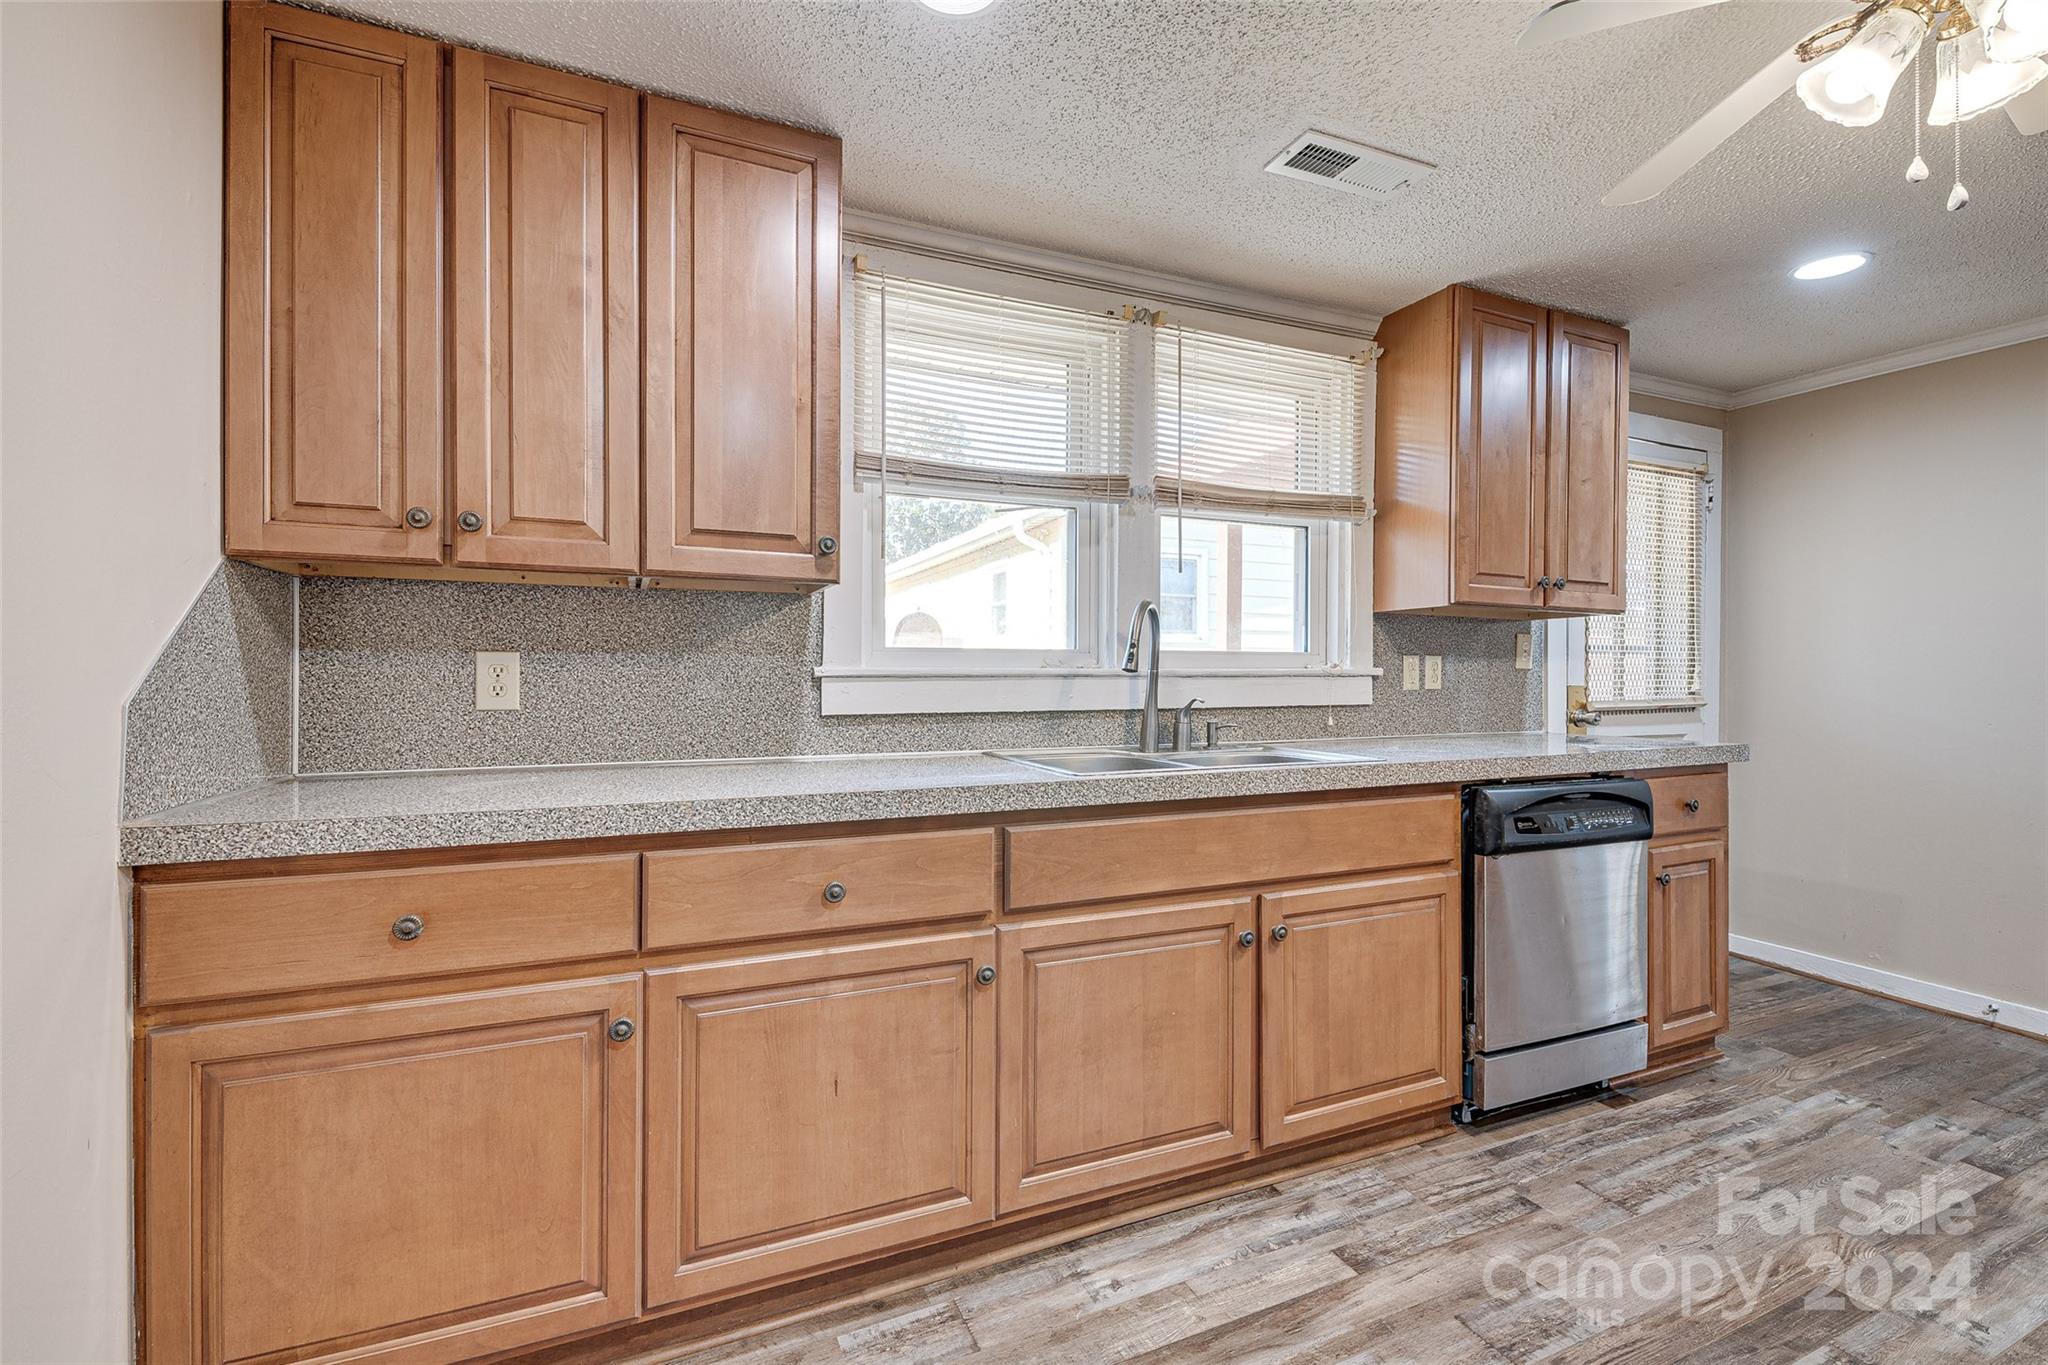 a kitchen with granite countertop stainless steel appliances sink and cabinets